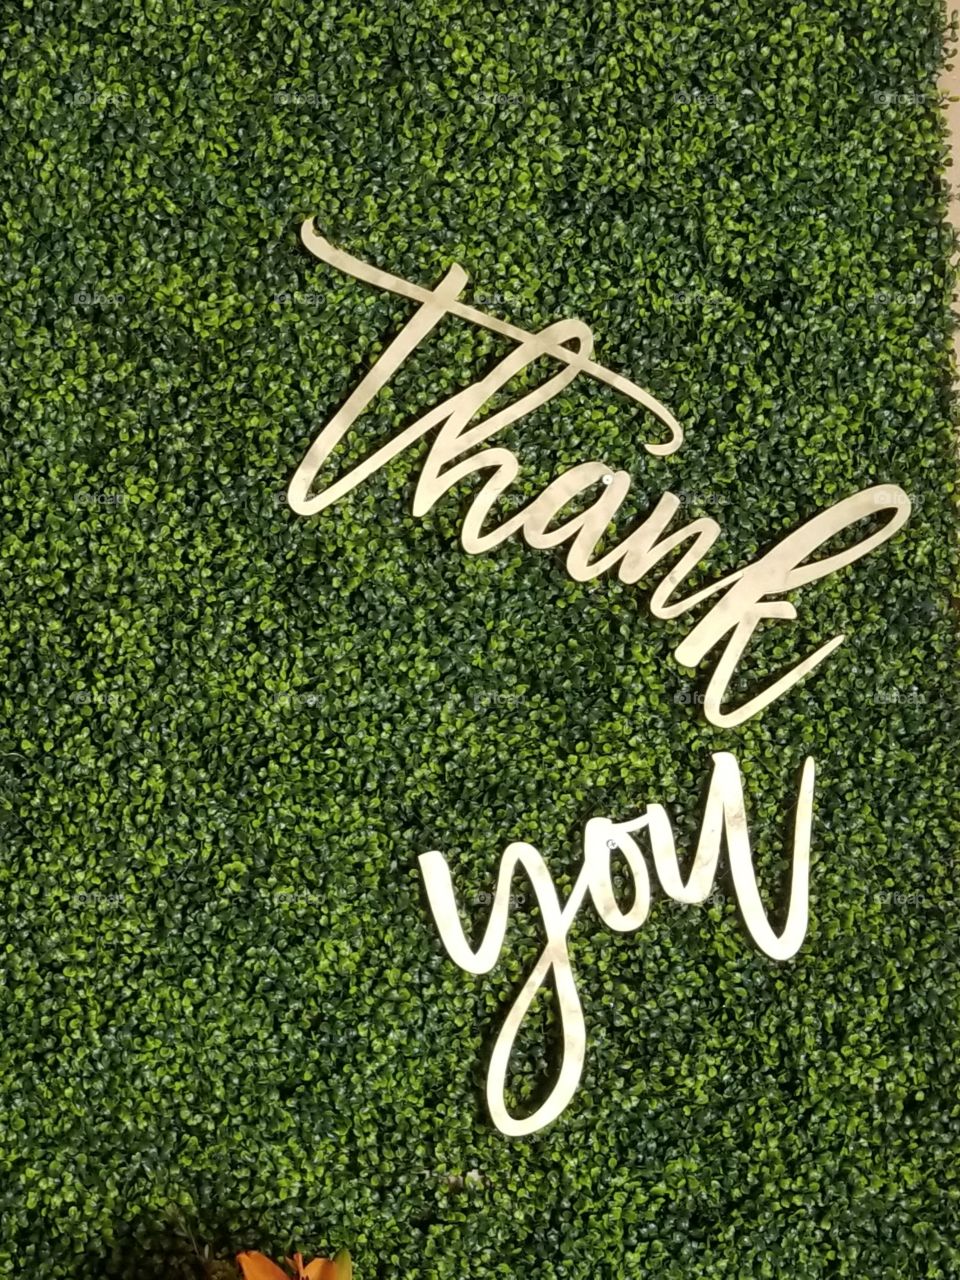 gold thank you sign on lush hedge